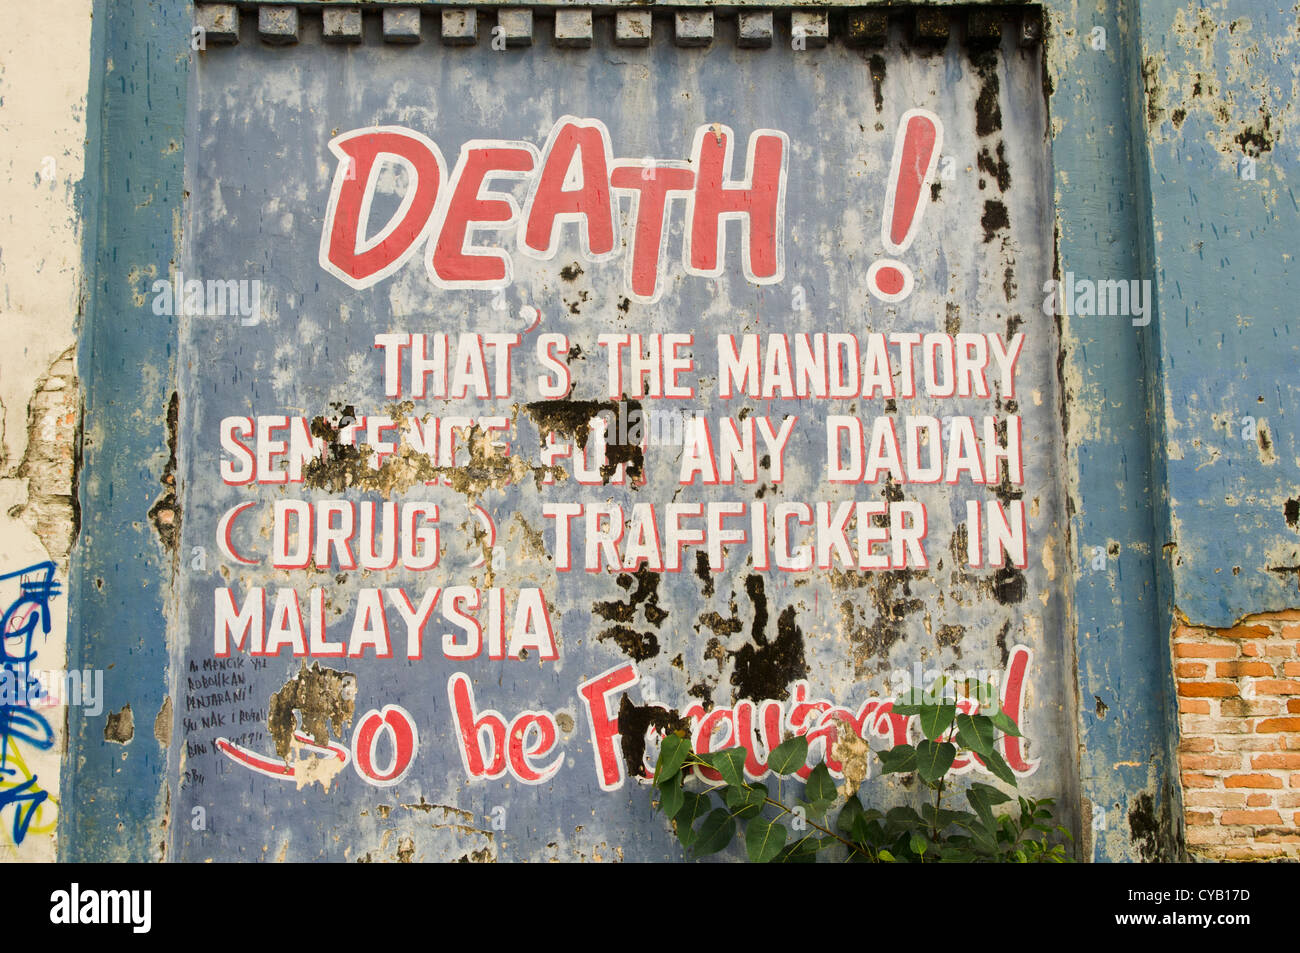 Drawing on the wall of Pudu Prison for message of death sentences for drug trafficker in malaysia. Stock Photo